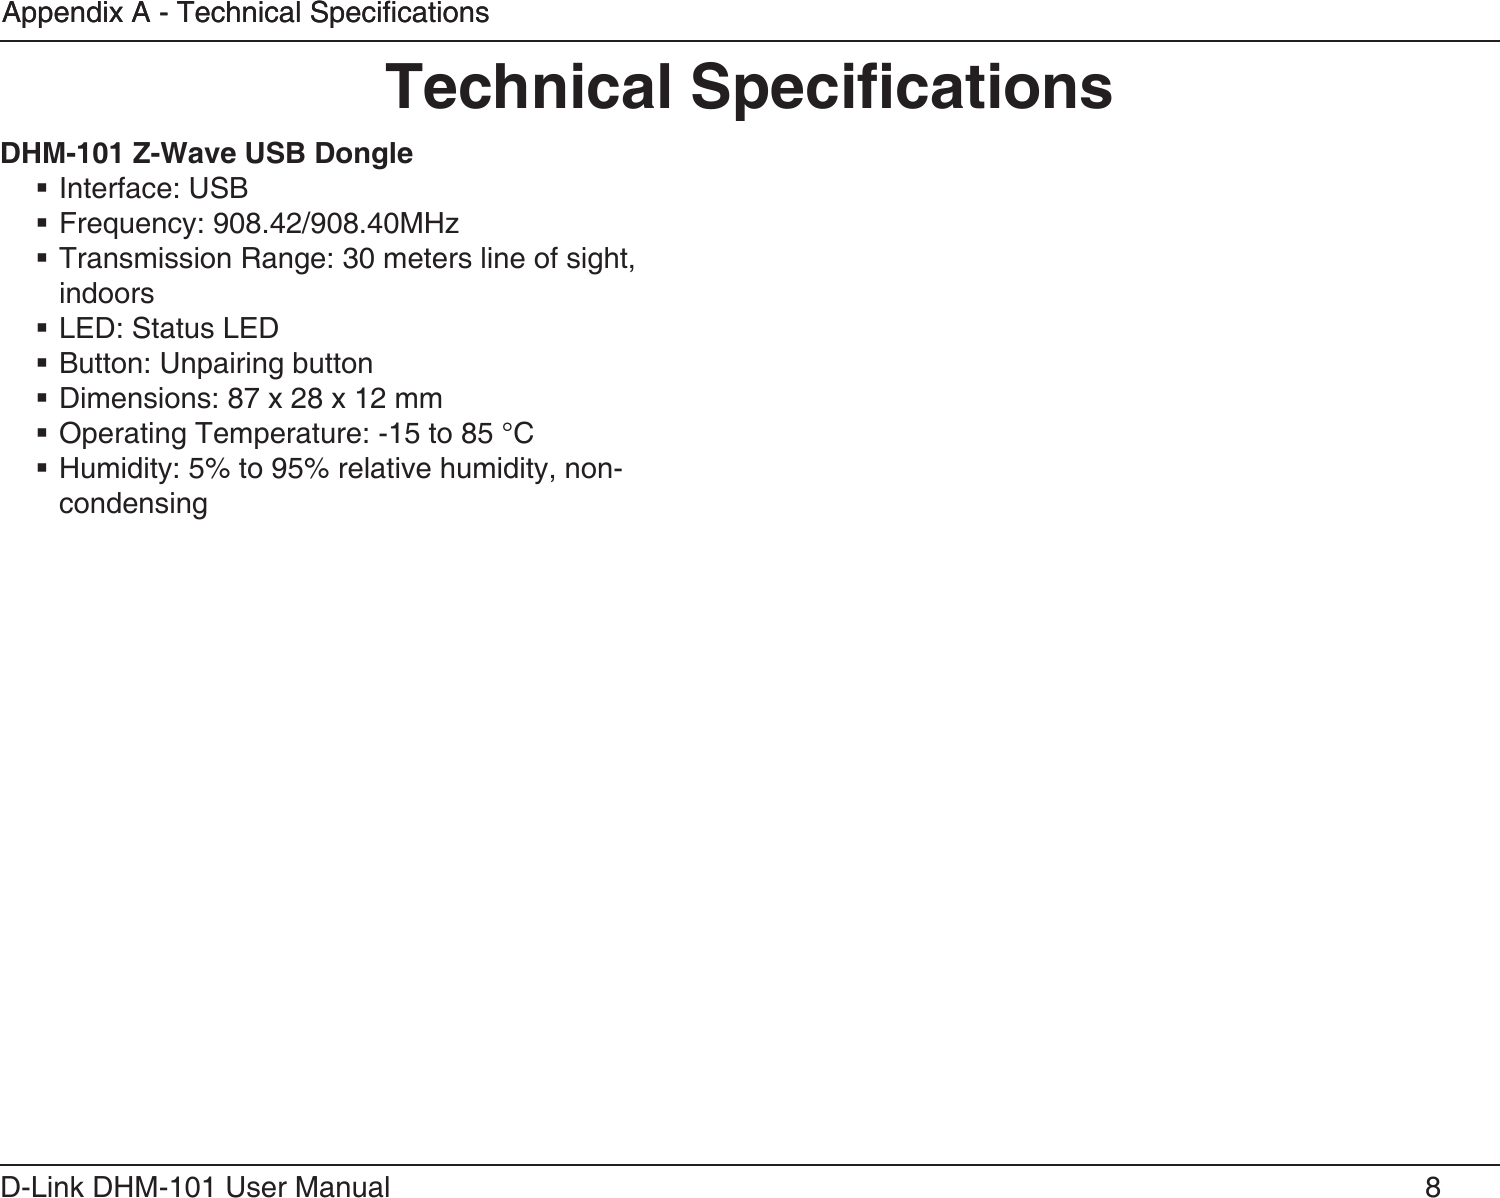 8D-Link DHM-101 User ManualAppendix A - Technical SpecicationsAppendix A - Technical Specications Interface: USB Frequency: 908.42/908.40MHz Transmission Range: 30 meters line of sight, indoors LED: Status LED Button: Unpairing button Dimensions: 87 x 28 x 12 mm Operating Temperature: -15 to 85 °C Humidity: 5% to 95% relative humidity, non-condensing 